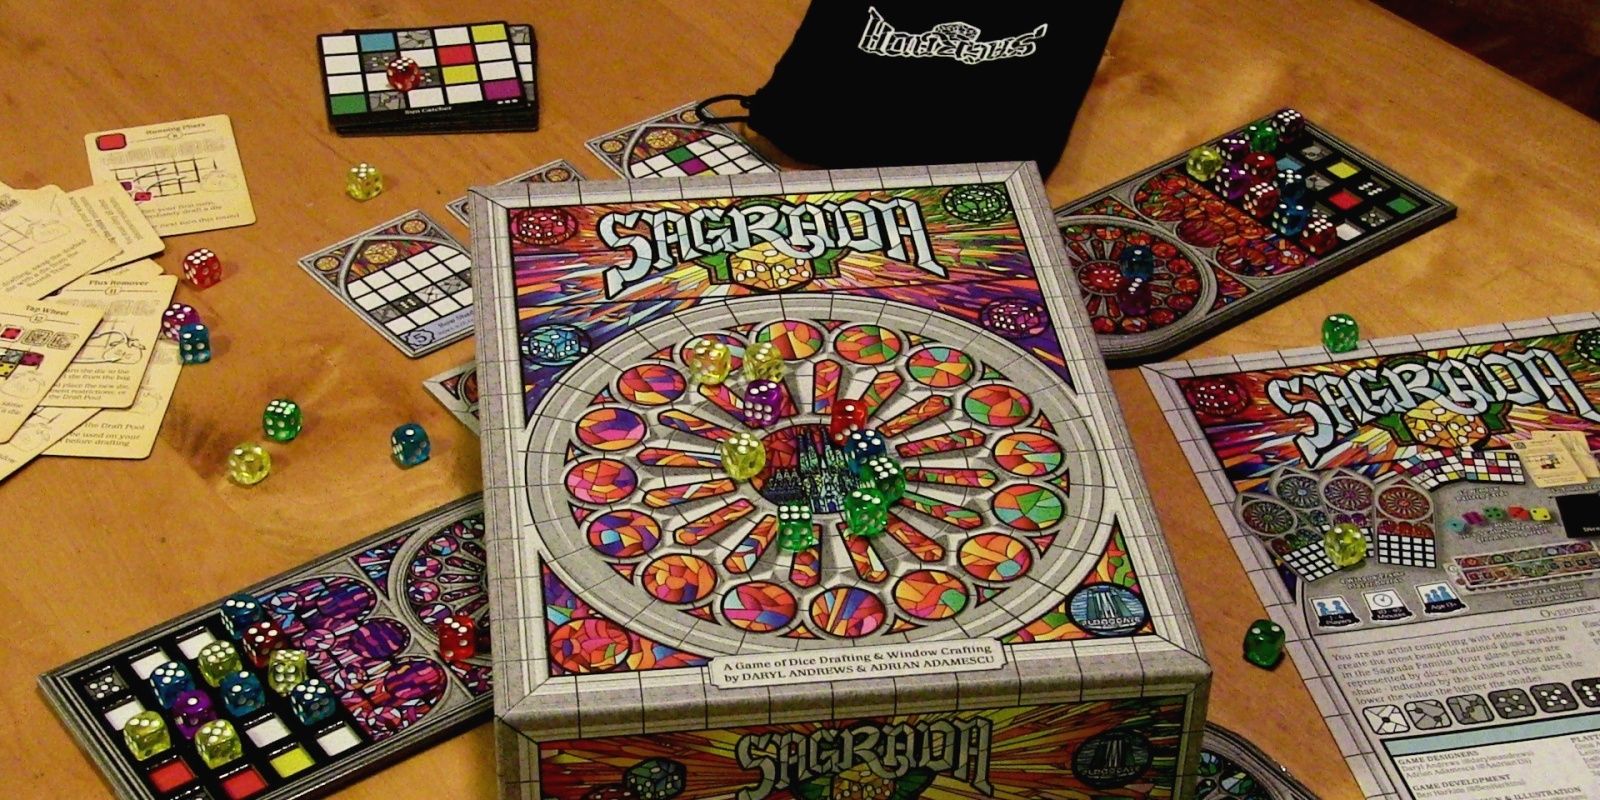 Sagrada Board Game Dice Game Components On Table